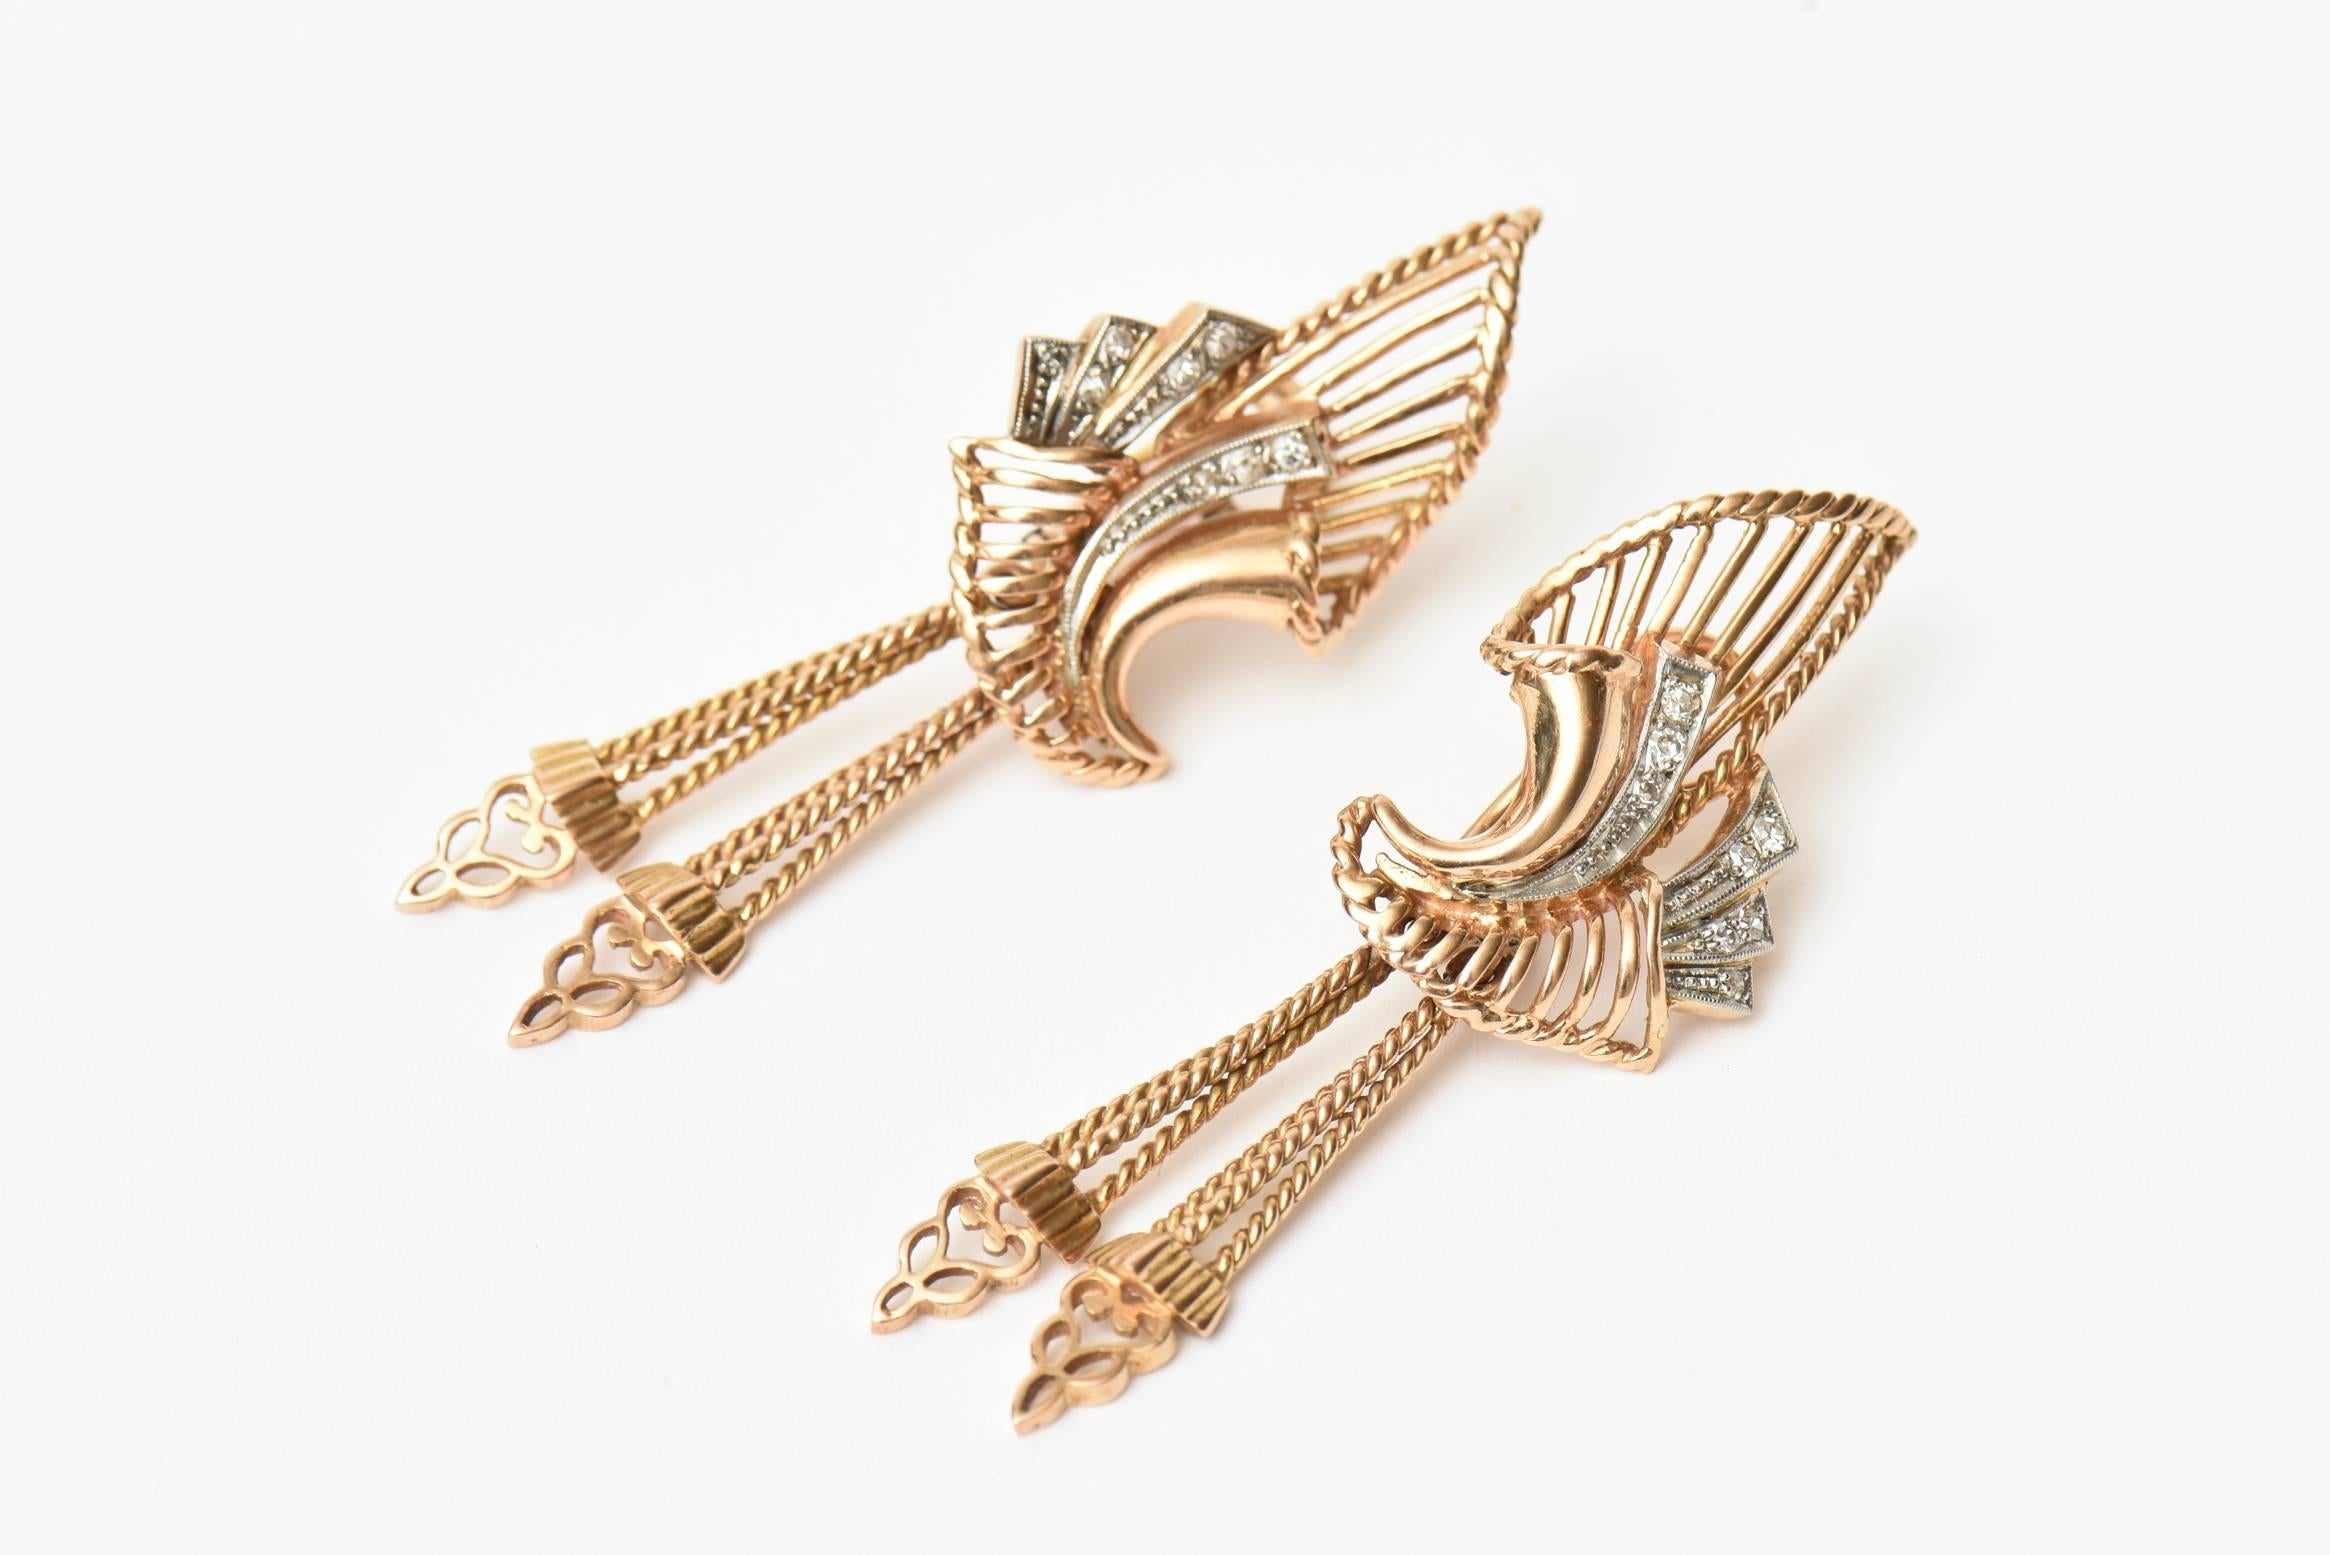 These gorgeous and elegant hallmarked retro pair of 18K rose gold and diamond pierced lever back earrings are stunning on the ear lobe.  There are approximately 0.25 carats of diamonds. The weight in grams for the earrings are 14.8. These are